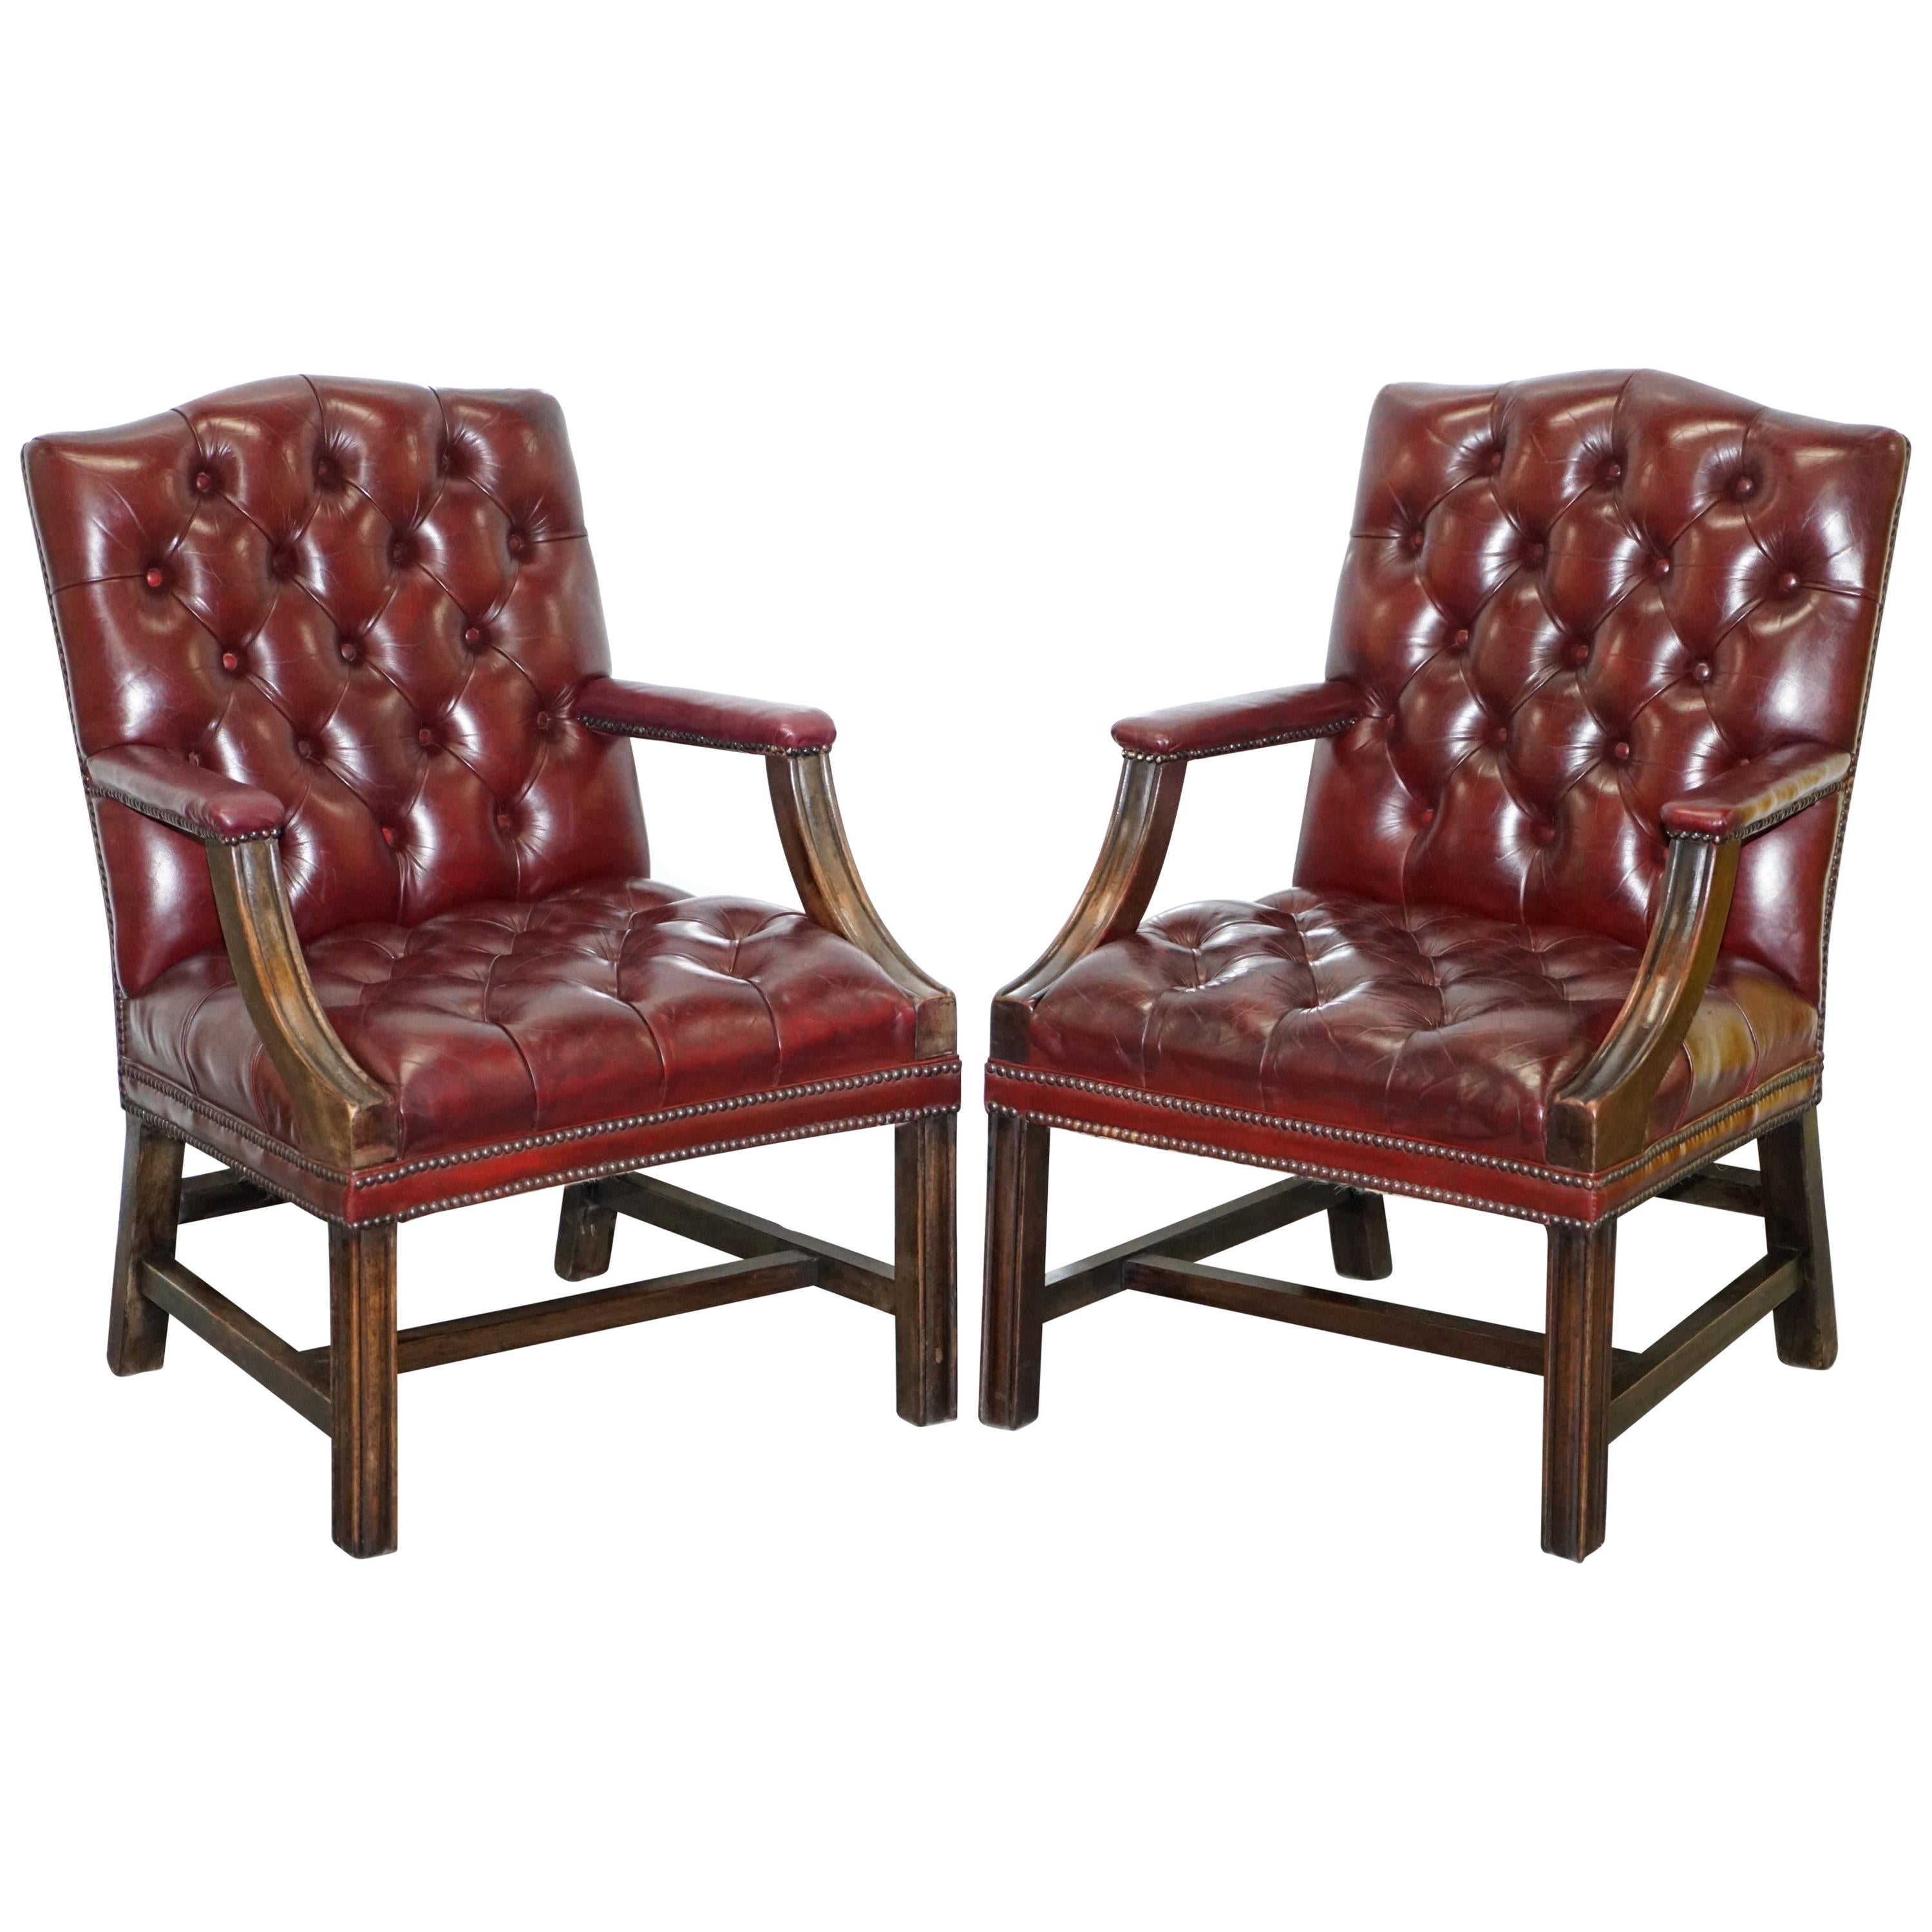 Pair of Chesterfield Carved Hardwood & Oxblood Leather Gainsborough Armchairs 2